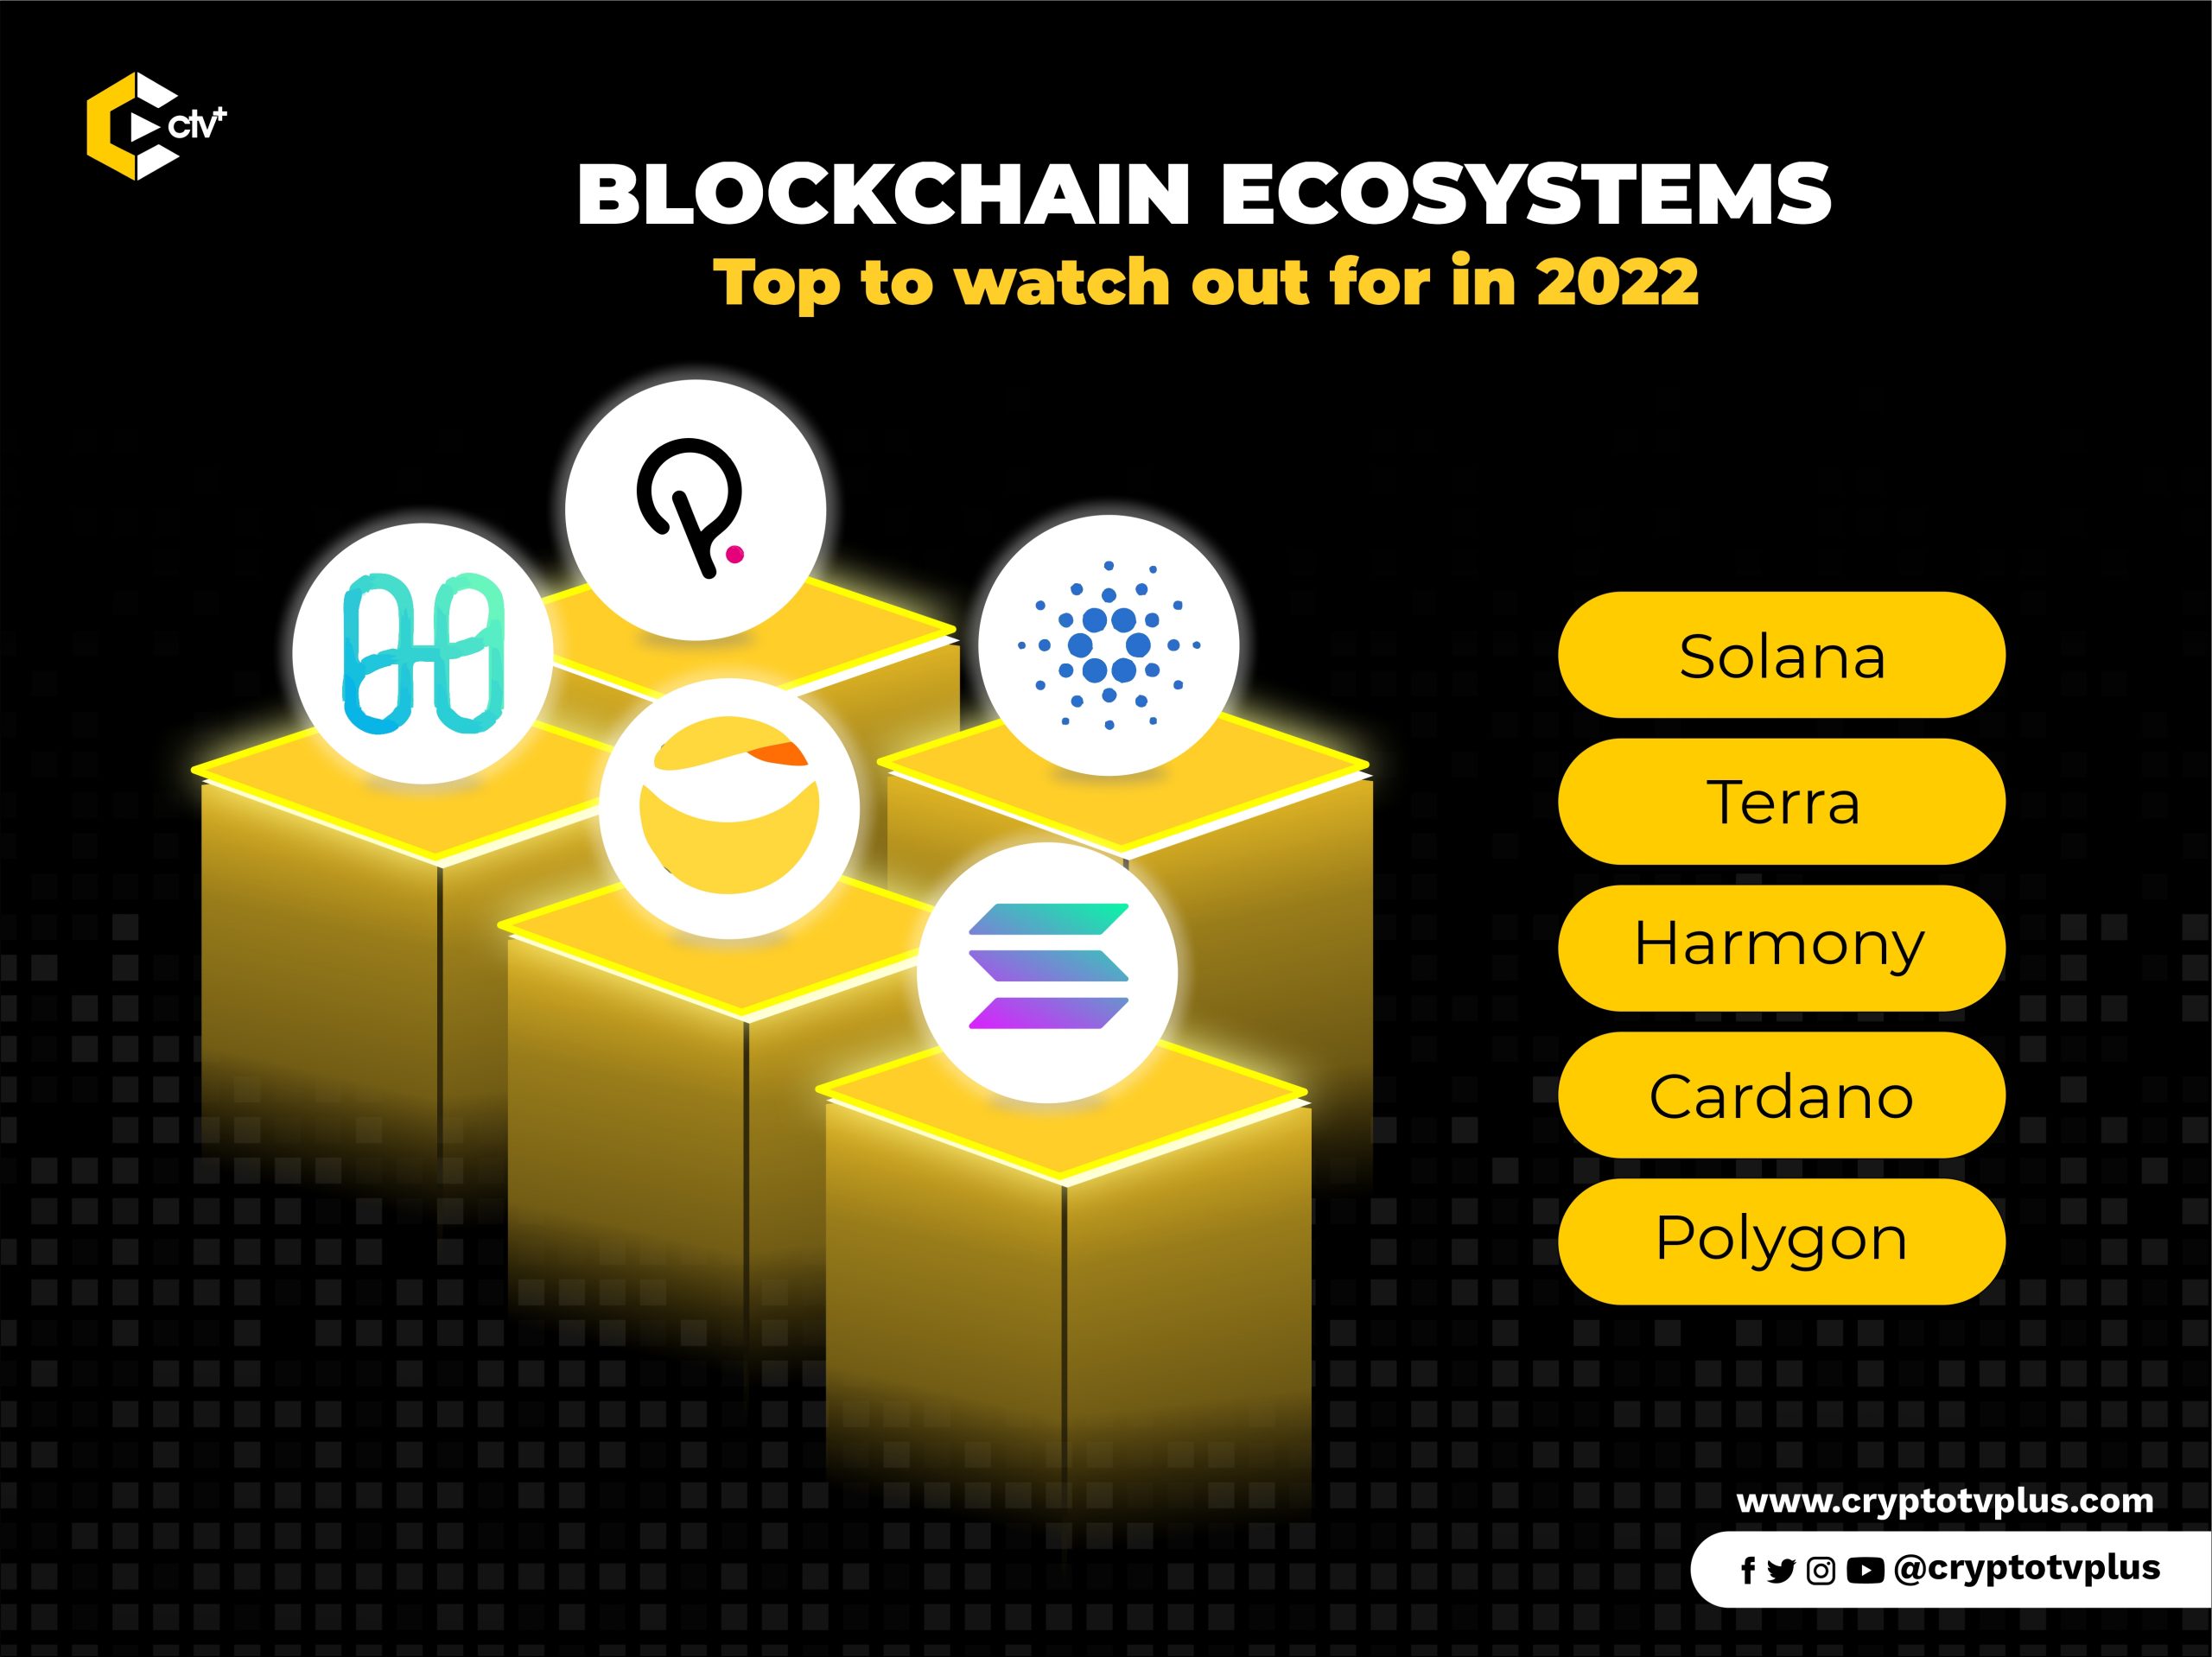 Top Blockchain Ecosystem to watch out for in 2022